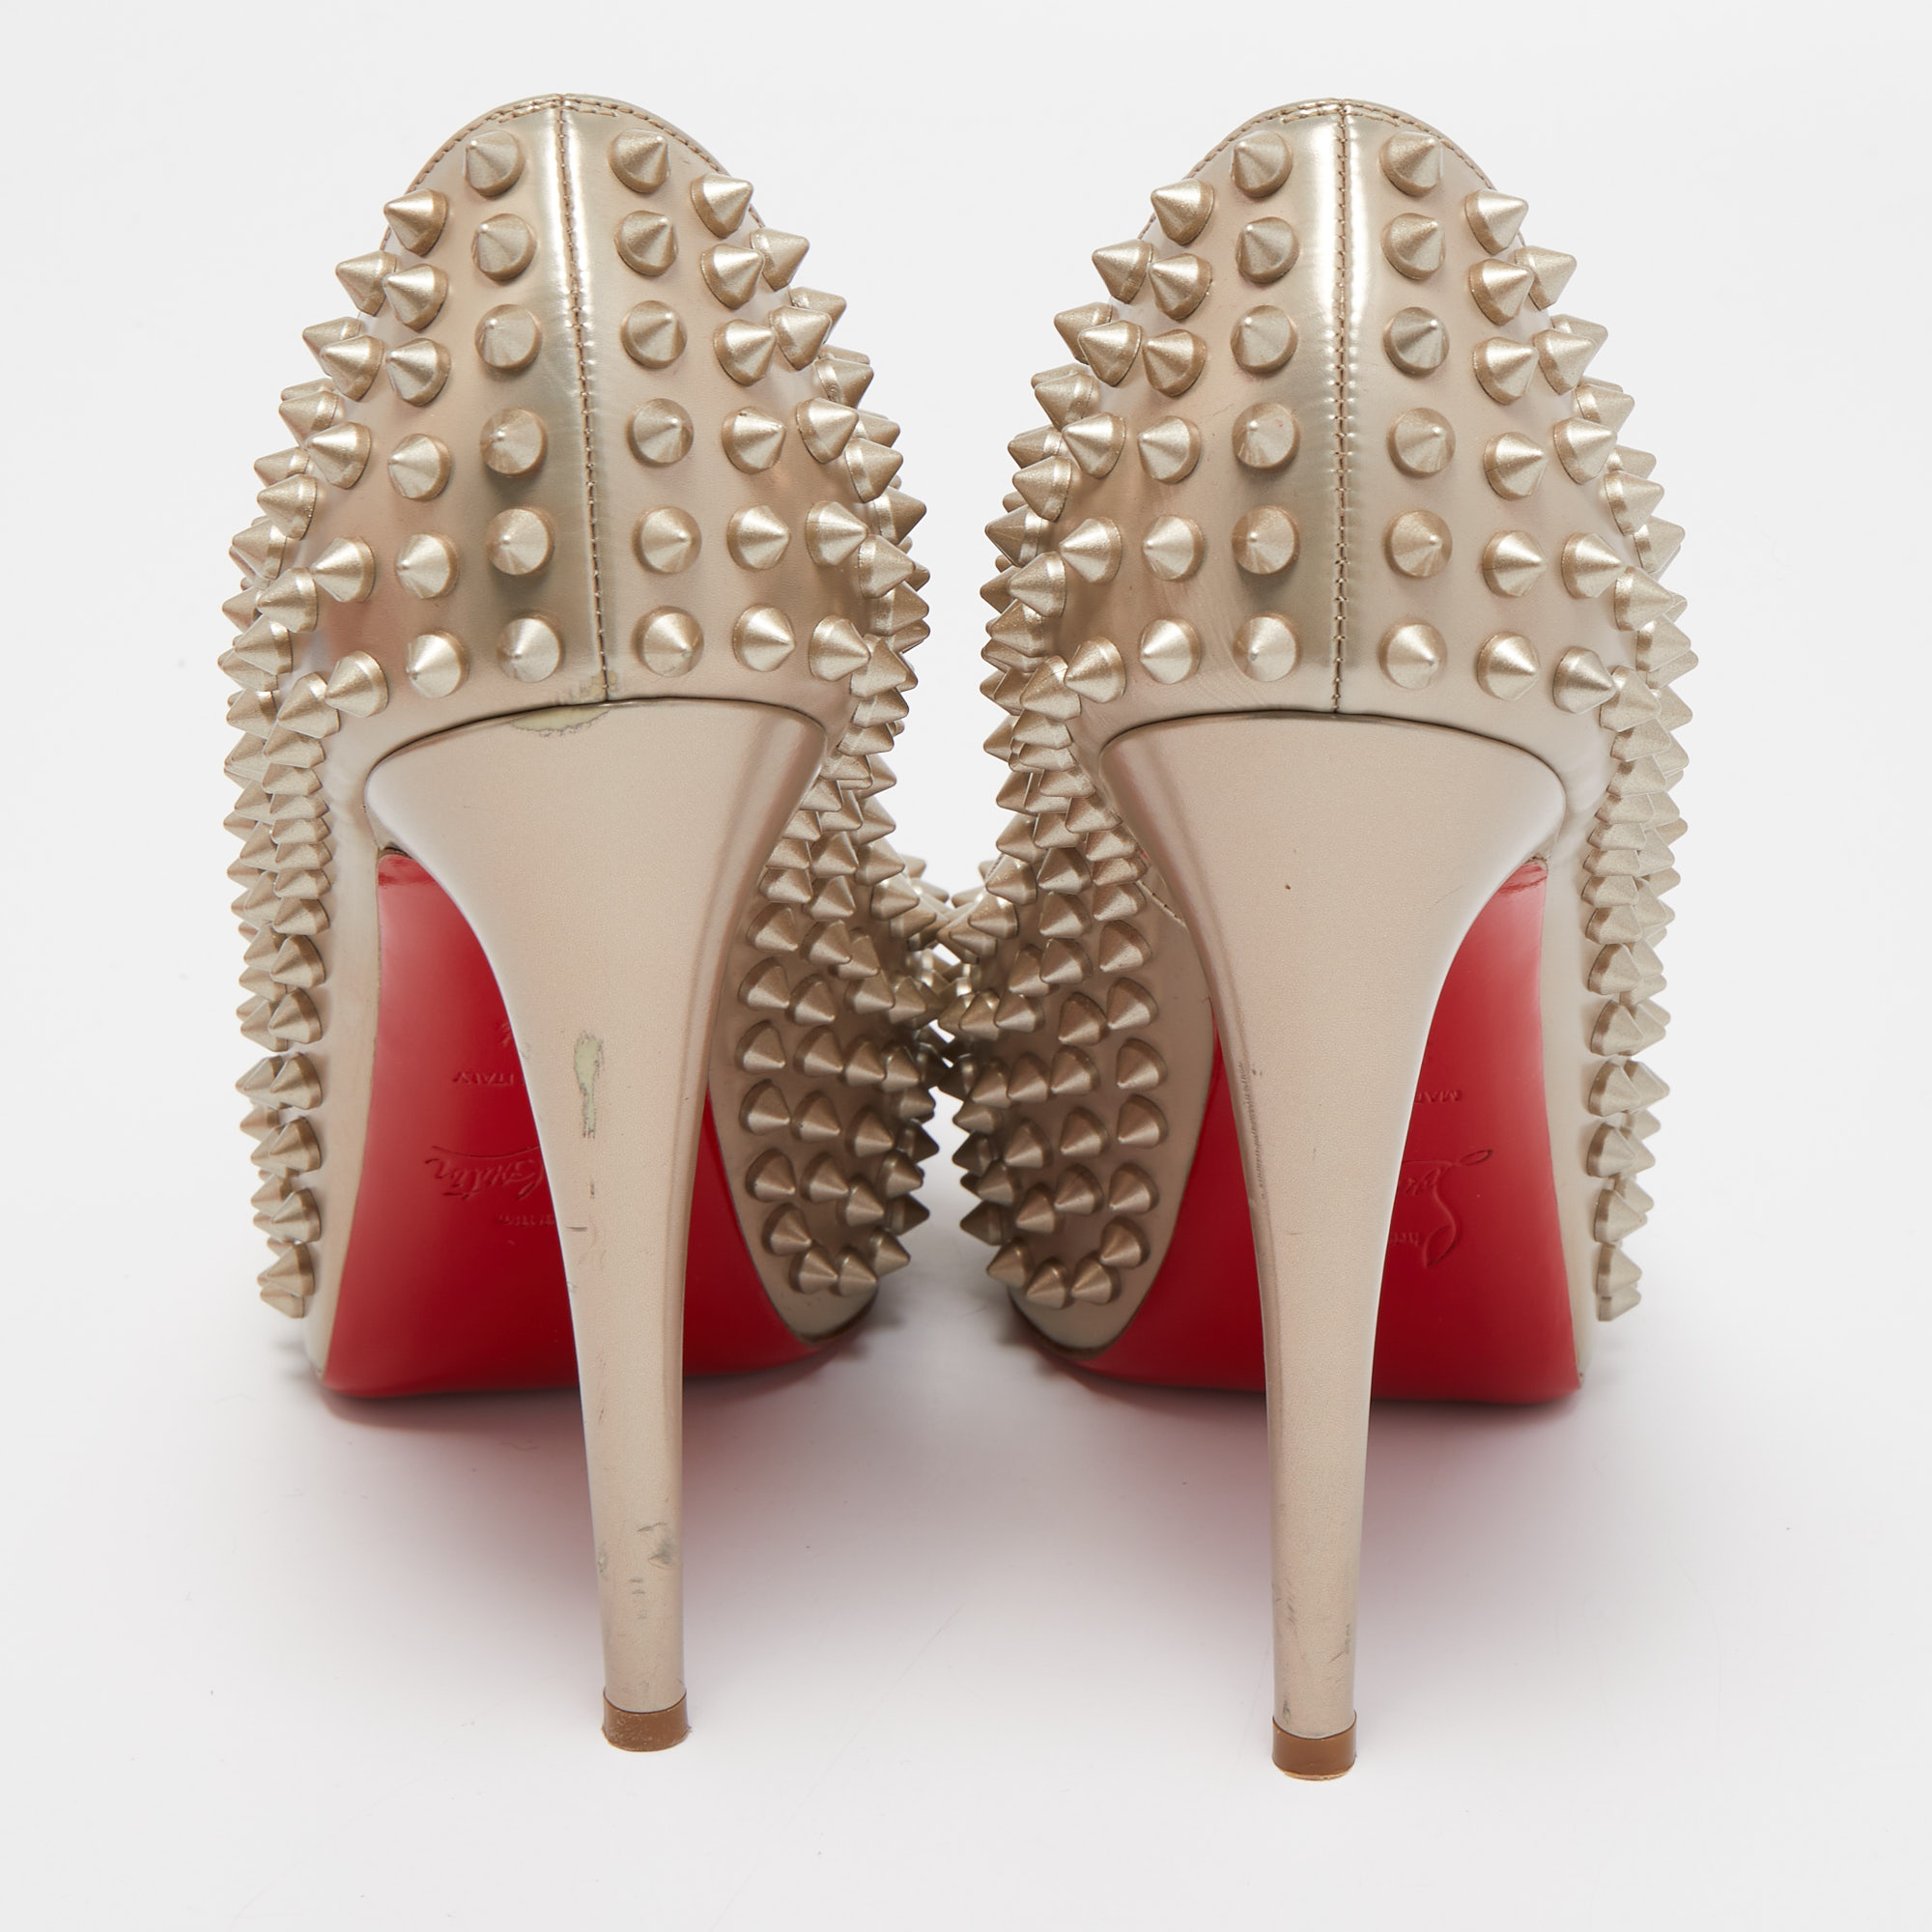 Christian Louboutin Beige Leather Very Prive Spike Pumps Size 37.5